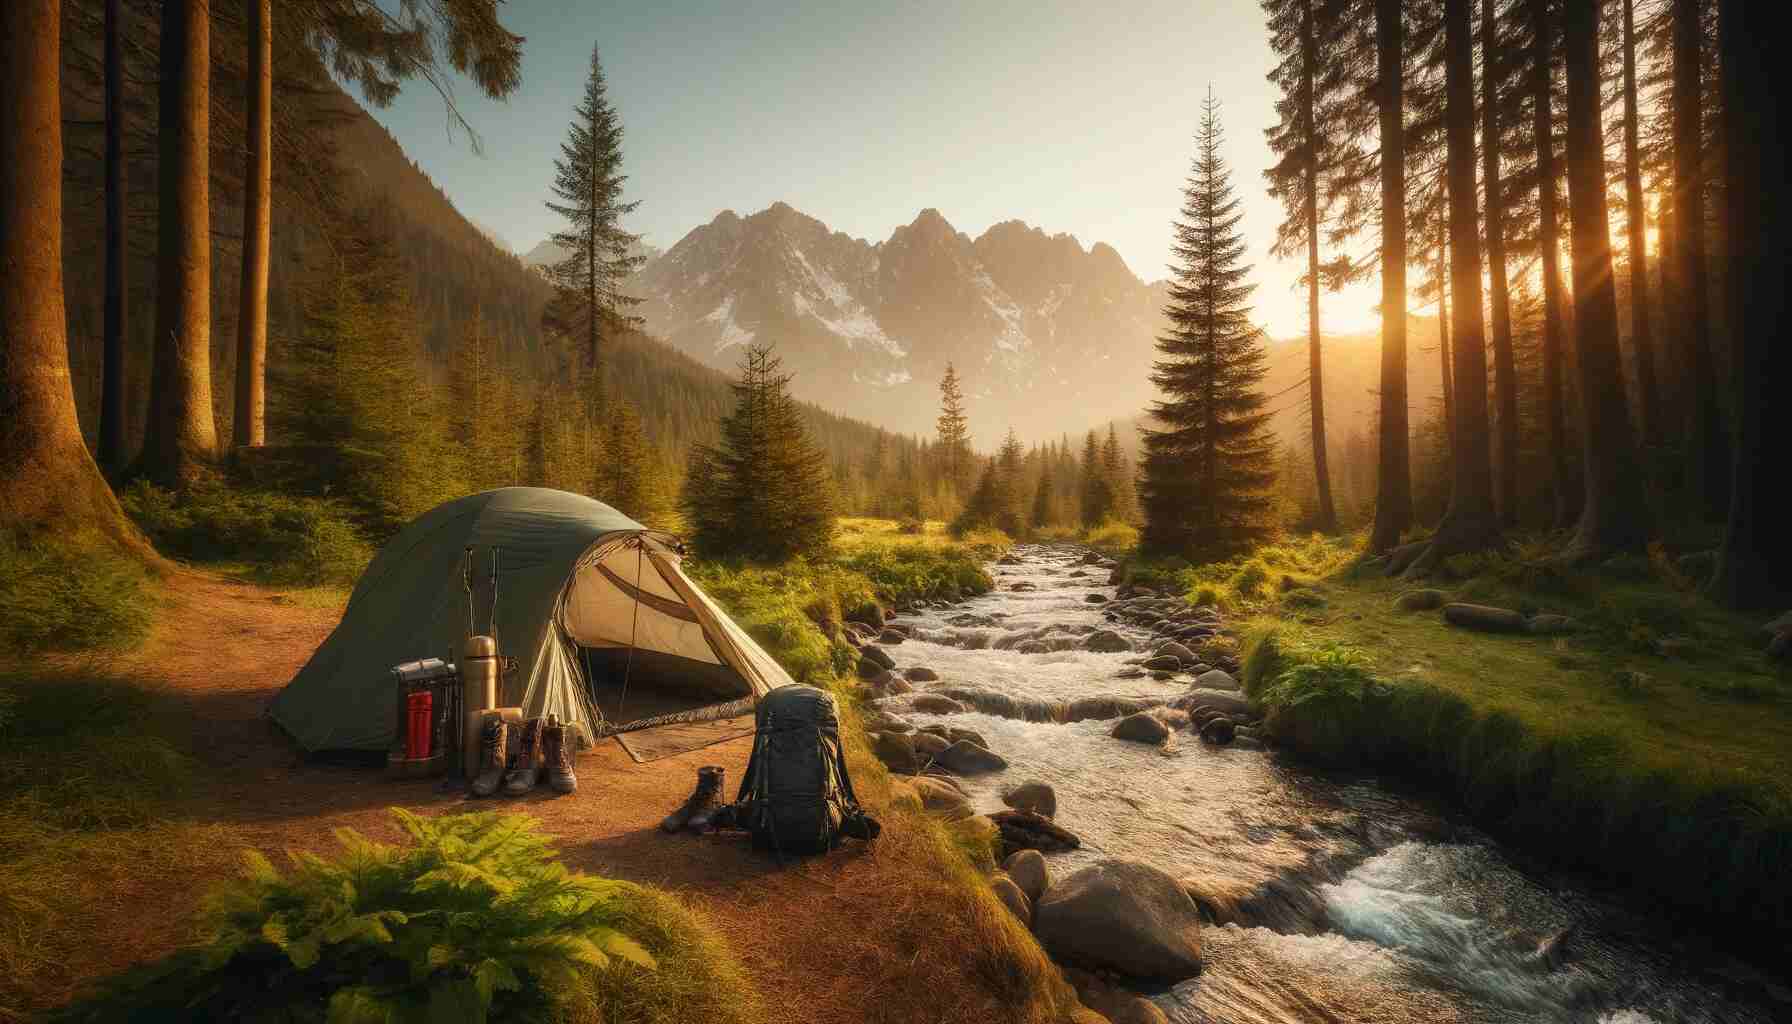 A scenic campsite in the wilderness with a lightweight backpacking tent set up near a clear mountain stream, surrounded by lush greenery, tall trees, and distant snow-capped mountains under a golden sunset. Backpacking gear is neatly arranged outside the tent, including a backpack, hiking boots, and a campfire.